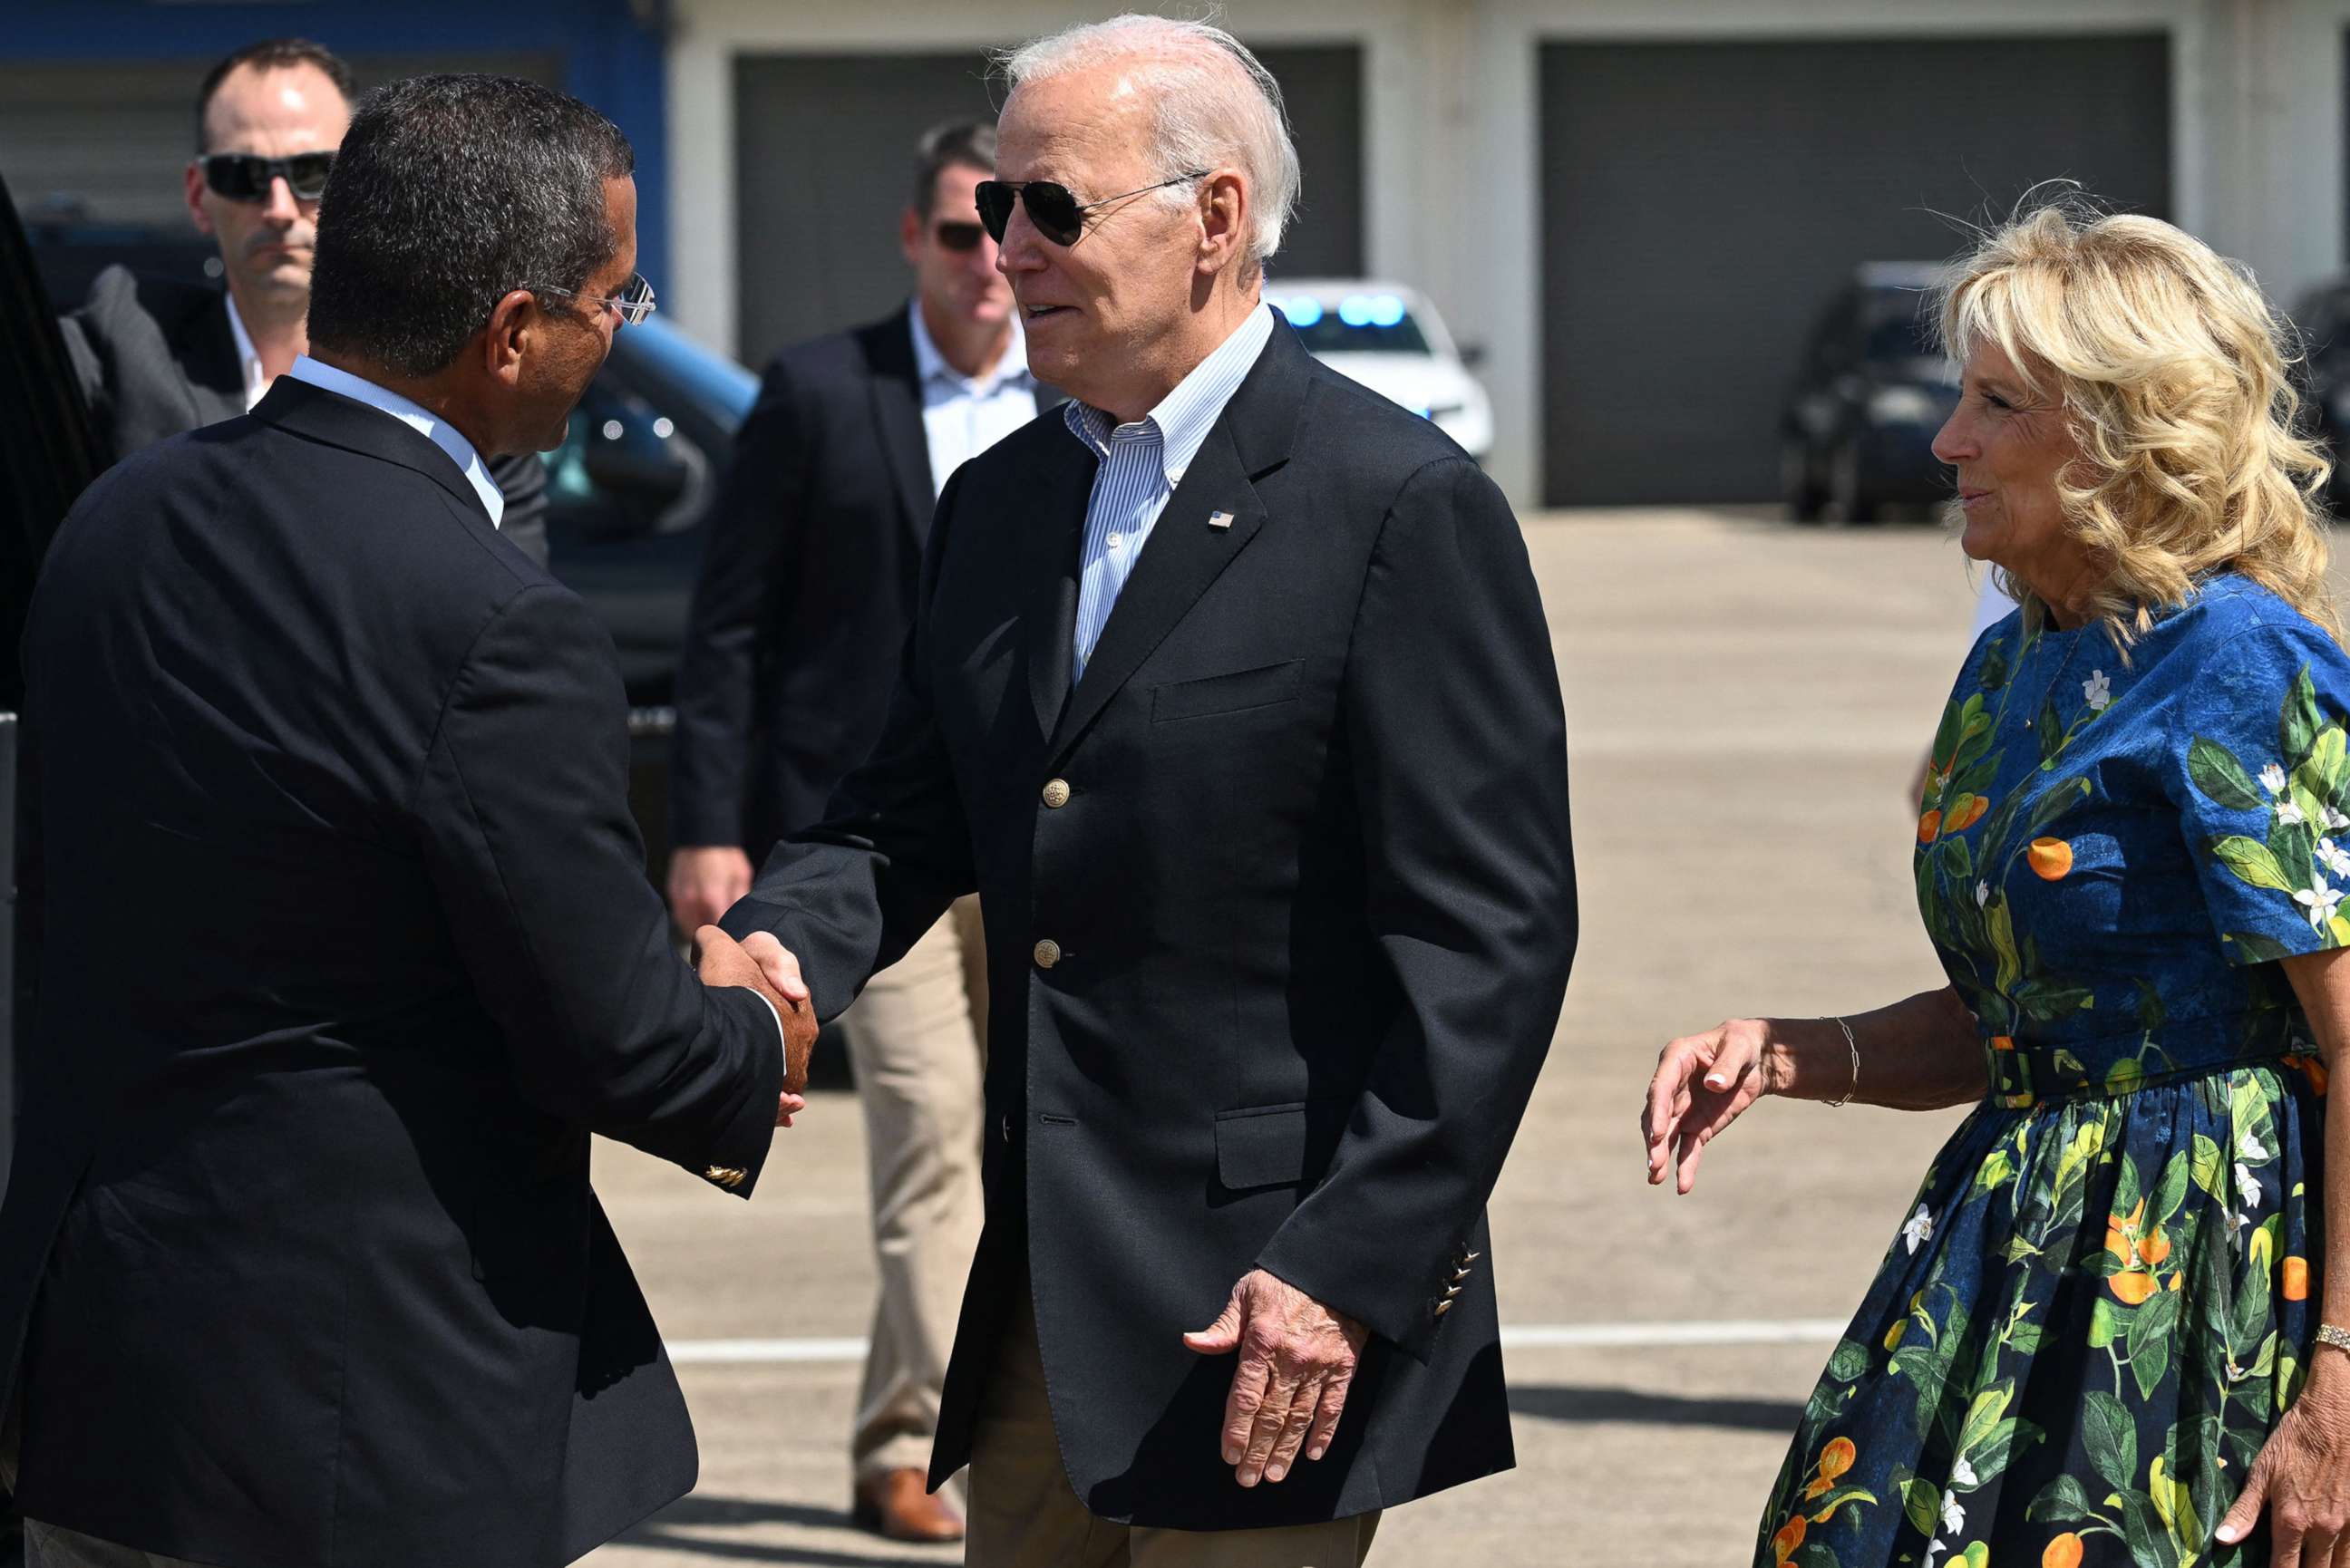 PHOTO: President Joe Biden and] First Lady Jill Biden are greeted by Governor of Puerto Rico Pedro Pierluisi upon arrival at Mercedita International Airport in the aftermath of Hurricane Fiona, in Ponce, Puerto Rico, Oct. 3, 2022.